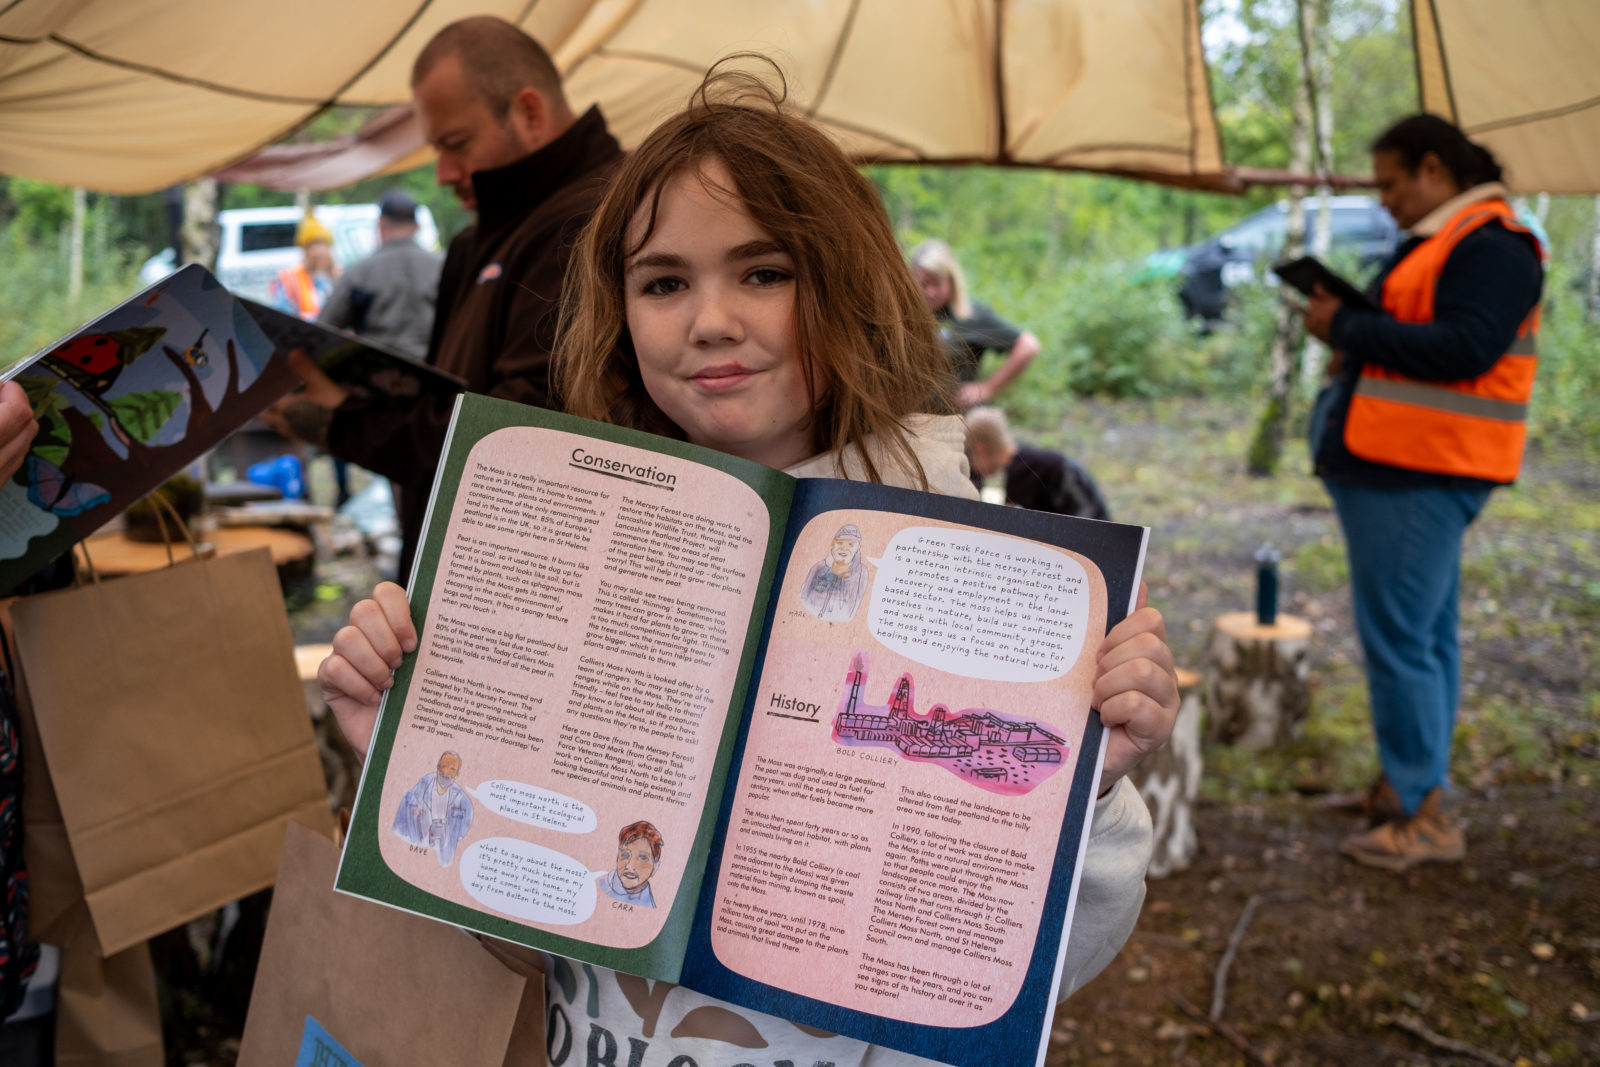 Photograph of a child holding up an activity book